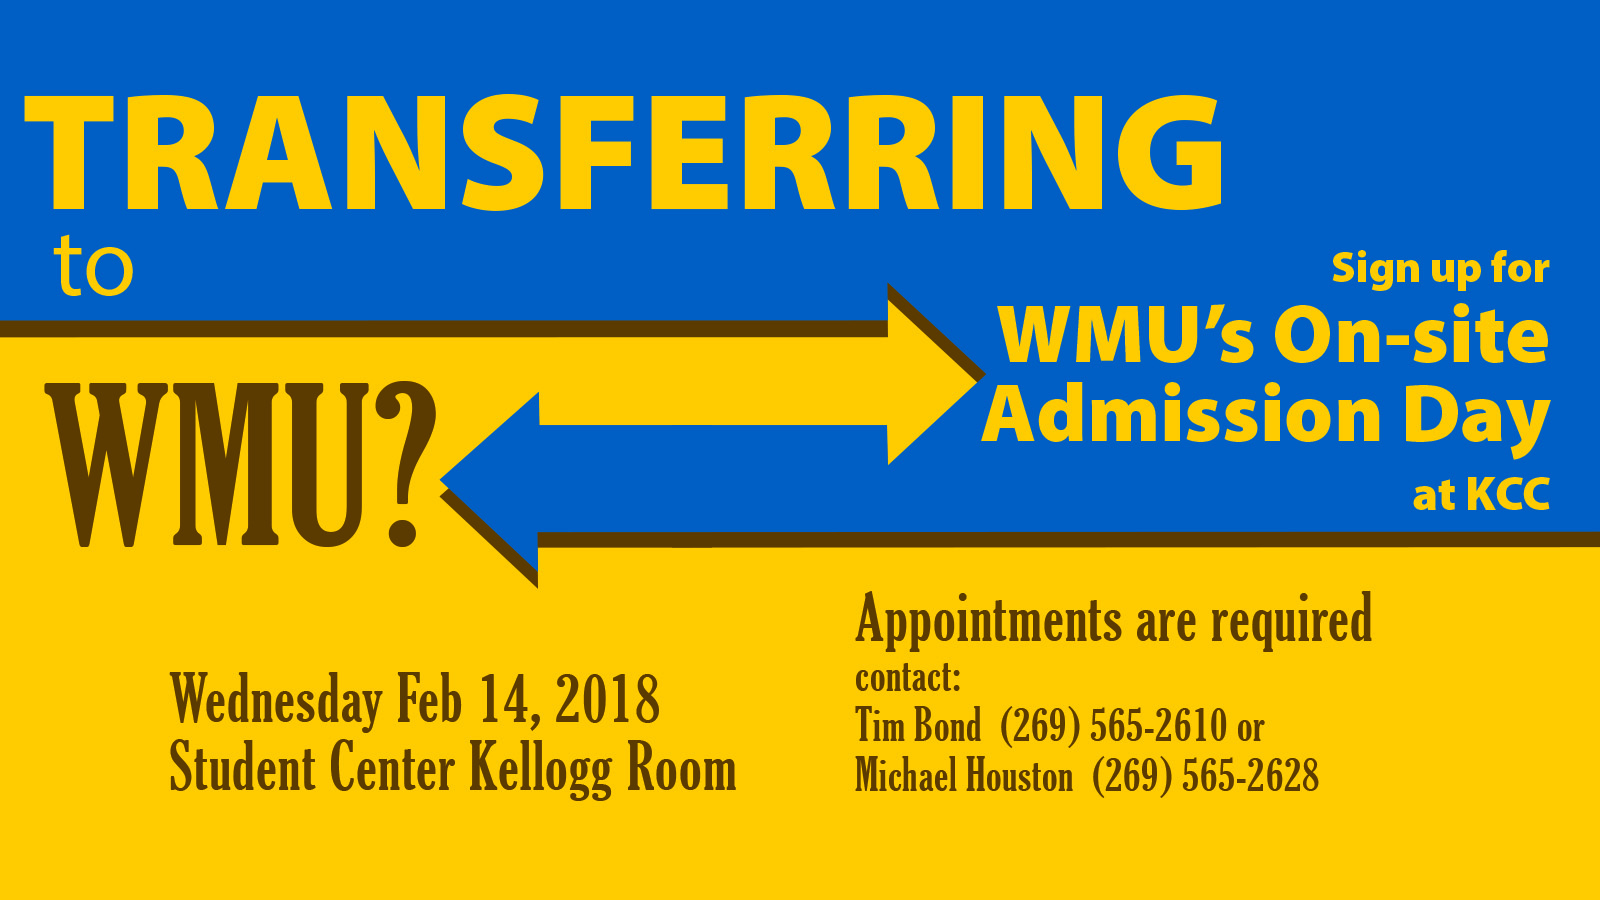 A text slide promoting WMU's On-site Admission Day Feb. 14, 2018, in the Kellogg Room of KCC's North Avenue campus in Battle Creek.